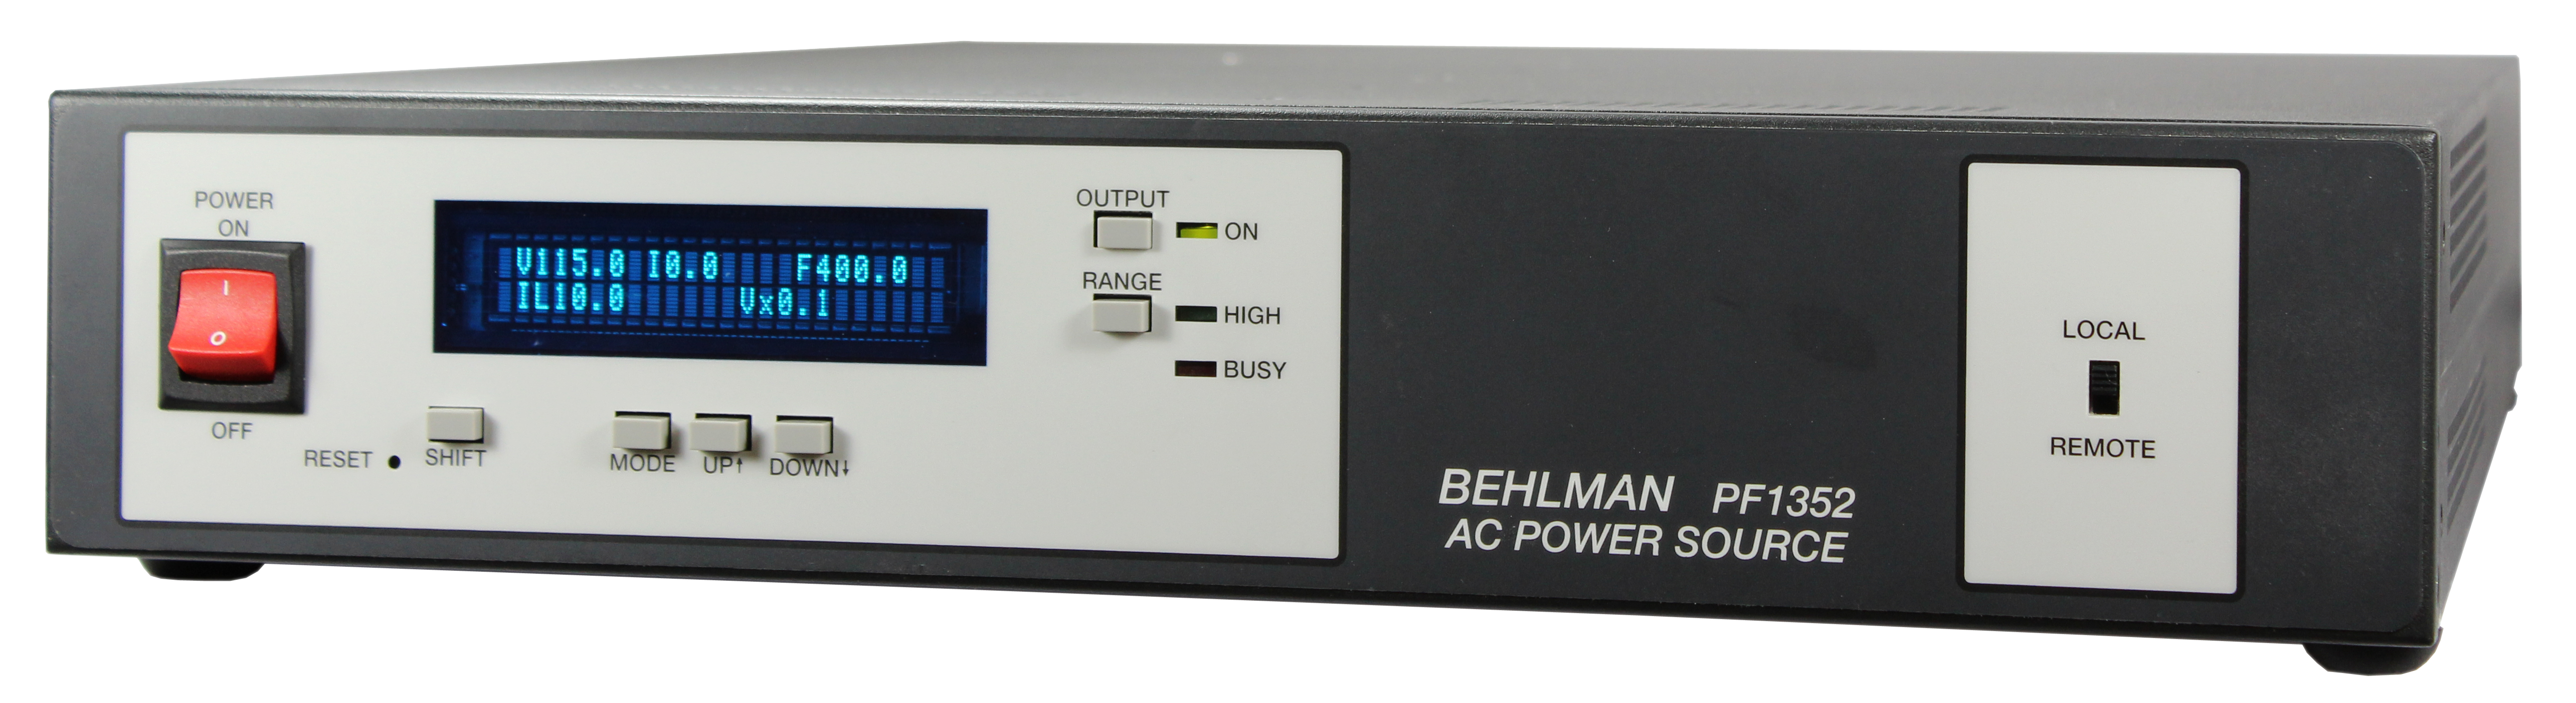 Behlman PF1352: AC power from 95-270 VAC input.  Output up to 1350 VA.